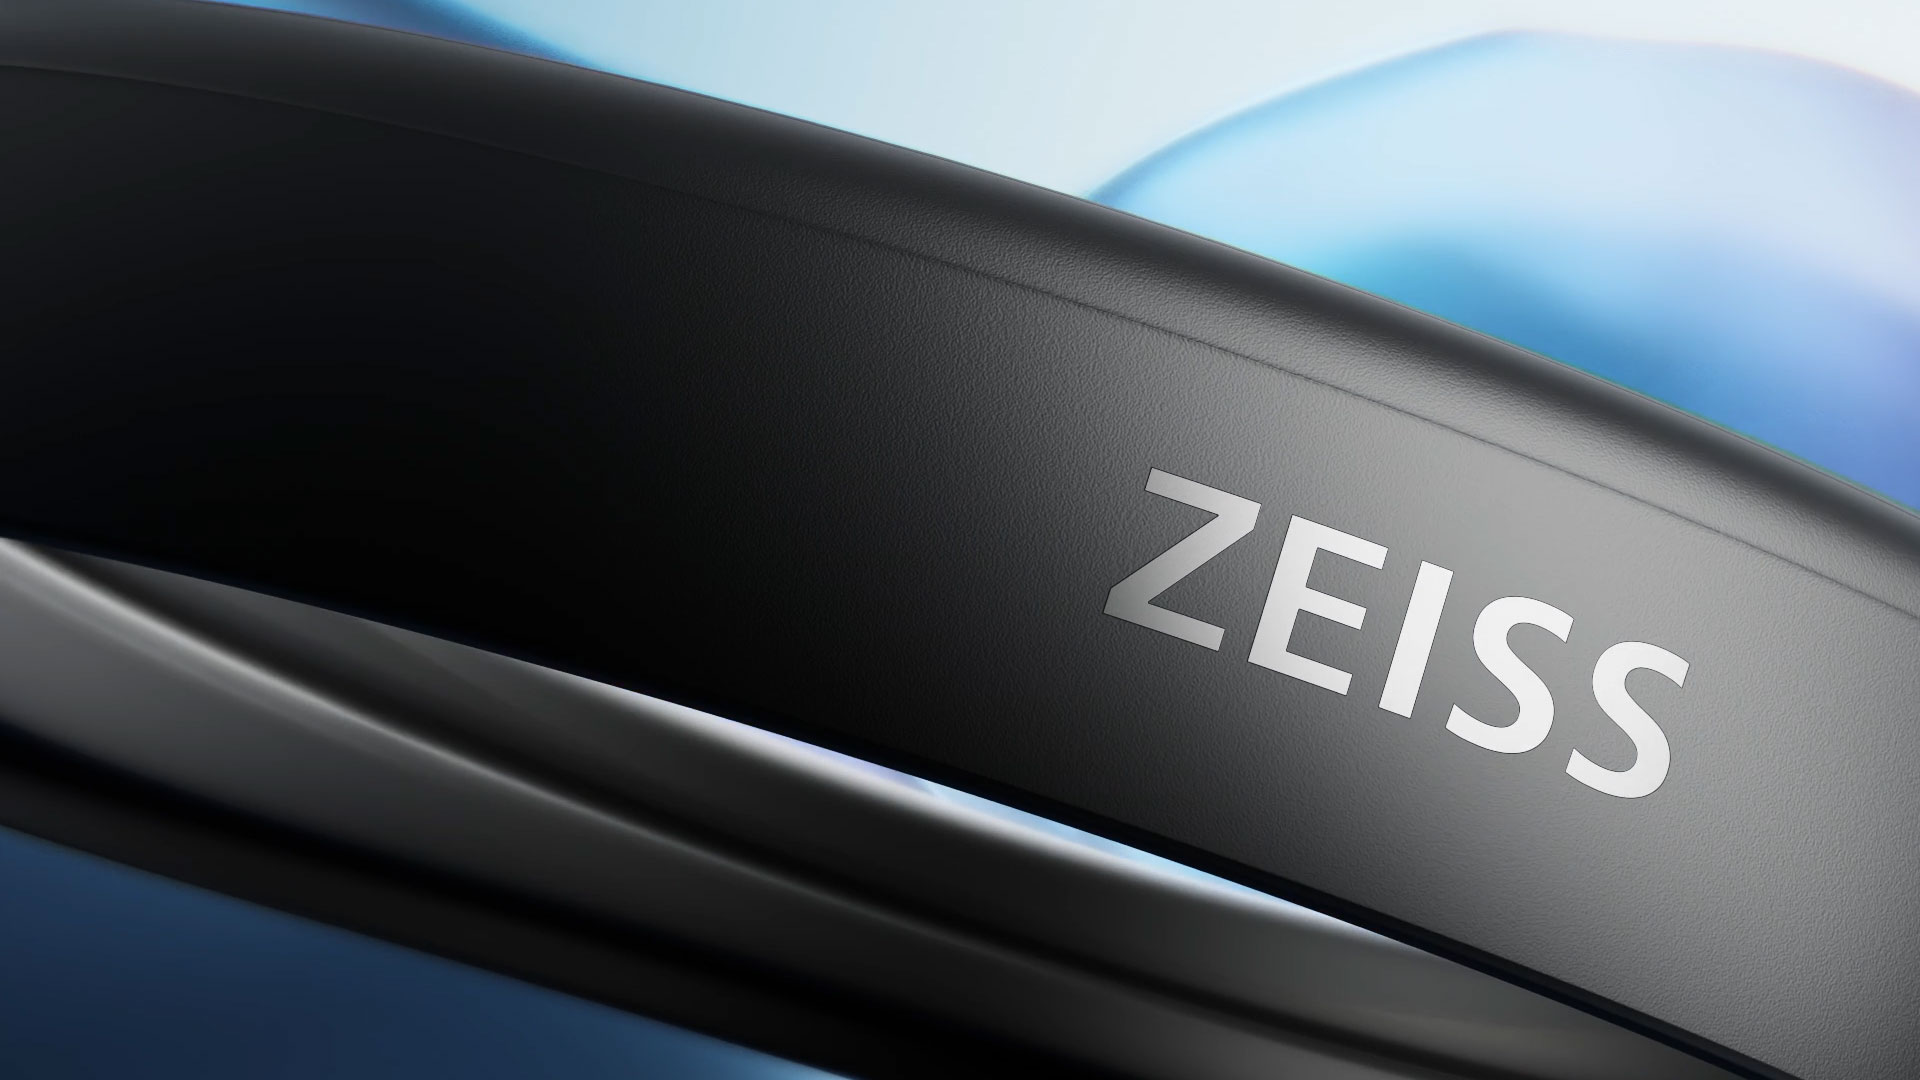 Apple and ZEISS: Collaborating on Visual Experience